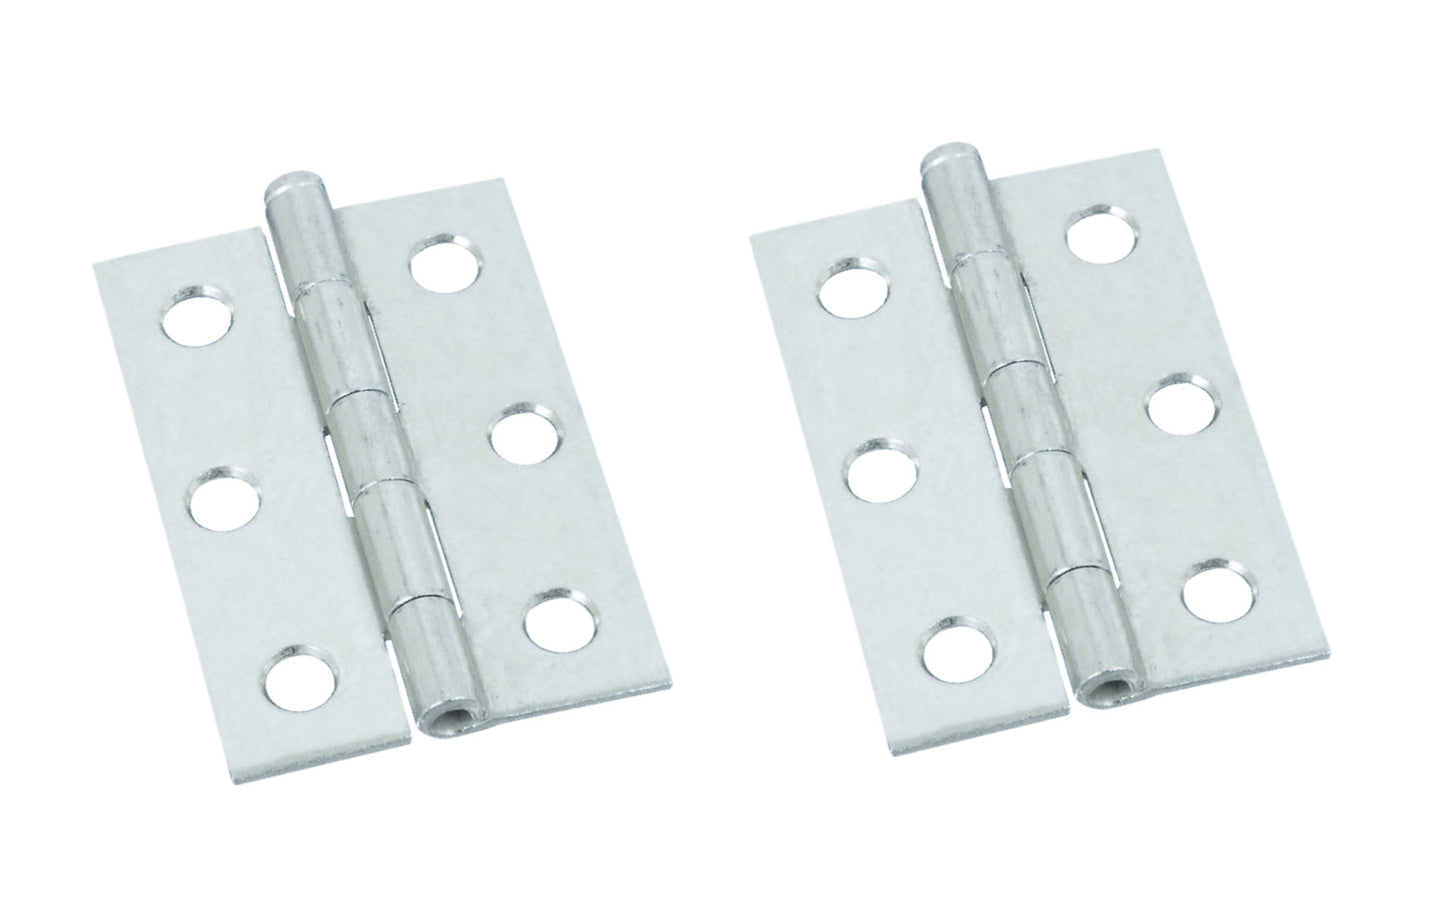 2-1/2" Zinc-Plated Loose-Pin Narrow Hinges - 2 Pack. 2-1/2" high x 1-11/16" wide. Made of cold-rolled steel with zinc plating. Surface mount. Removable pin hinges. Sold as a pair of hinges. National Hardware Model No. N141-945. 038613141940